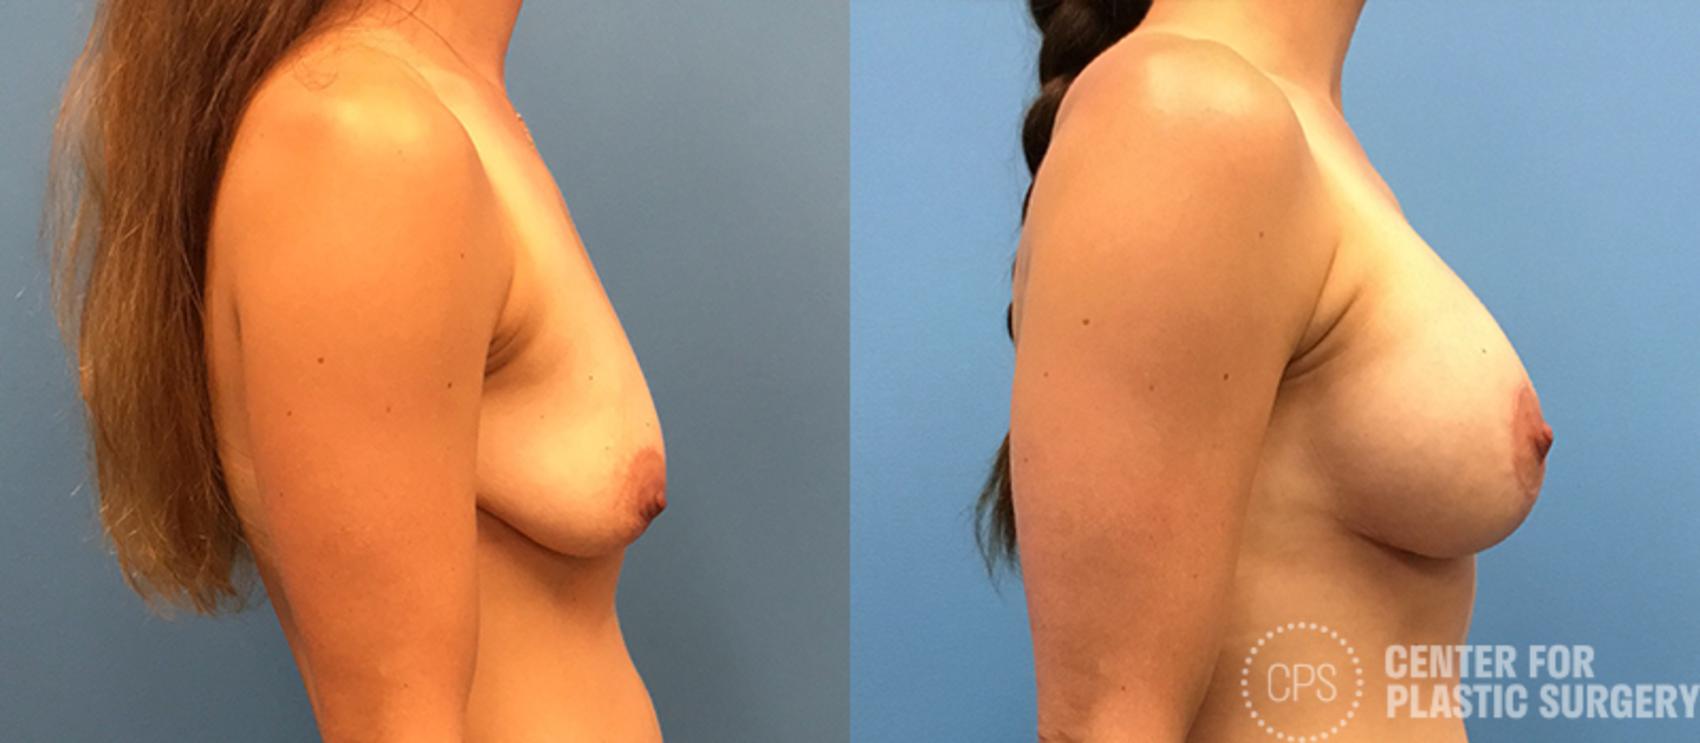 Breast Augmentation with Lift Case 118 Before & After Right Side | Chevy Chase & Annandale, Washington D.C. Metropolitan Area | Center for Plastic Surgery